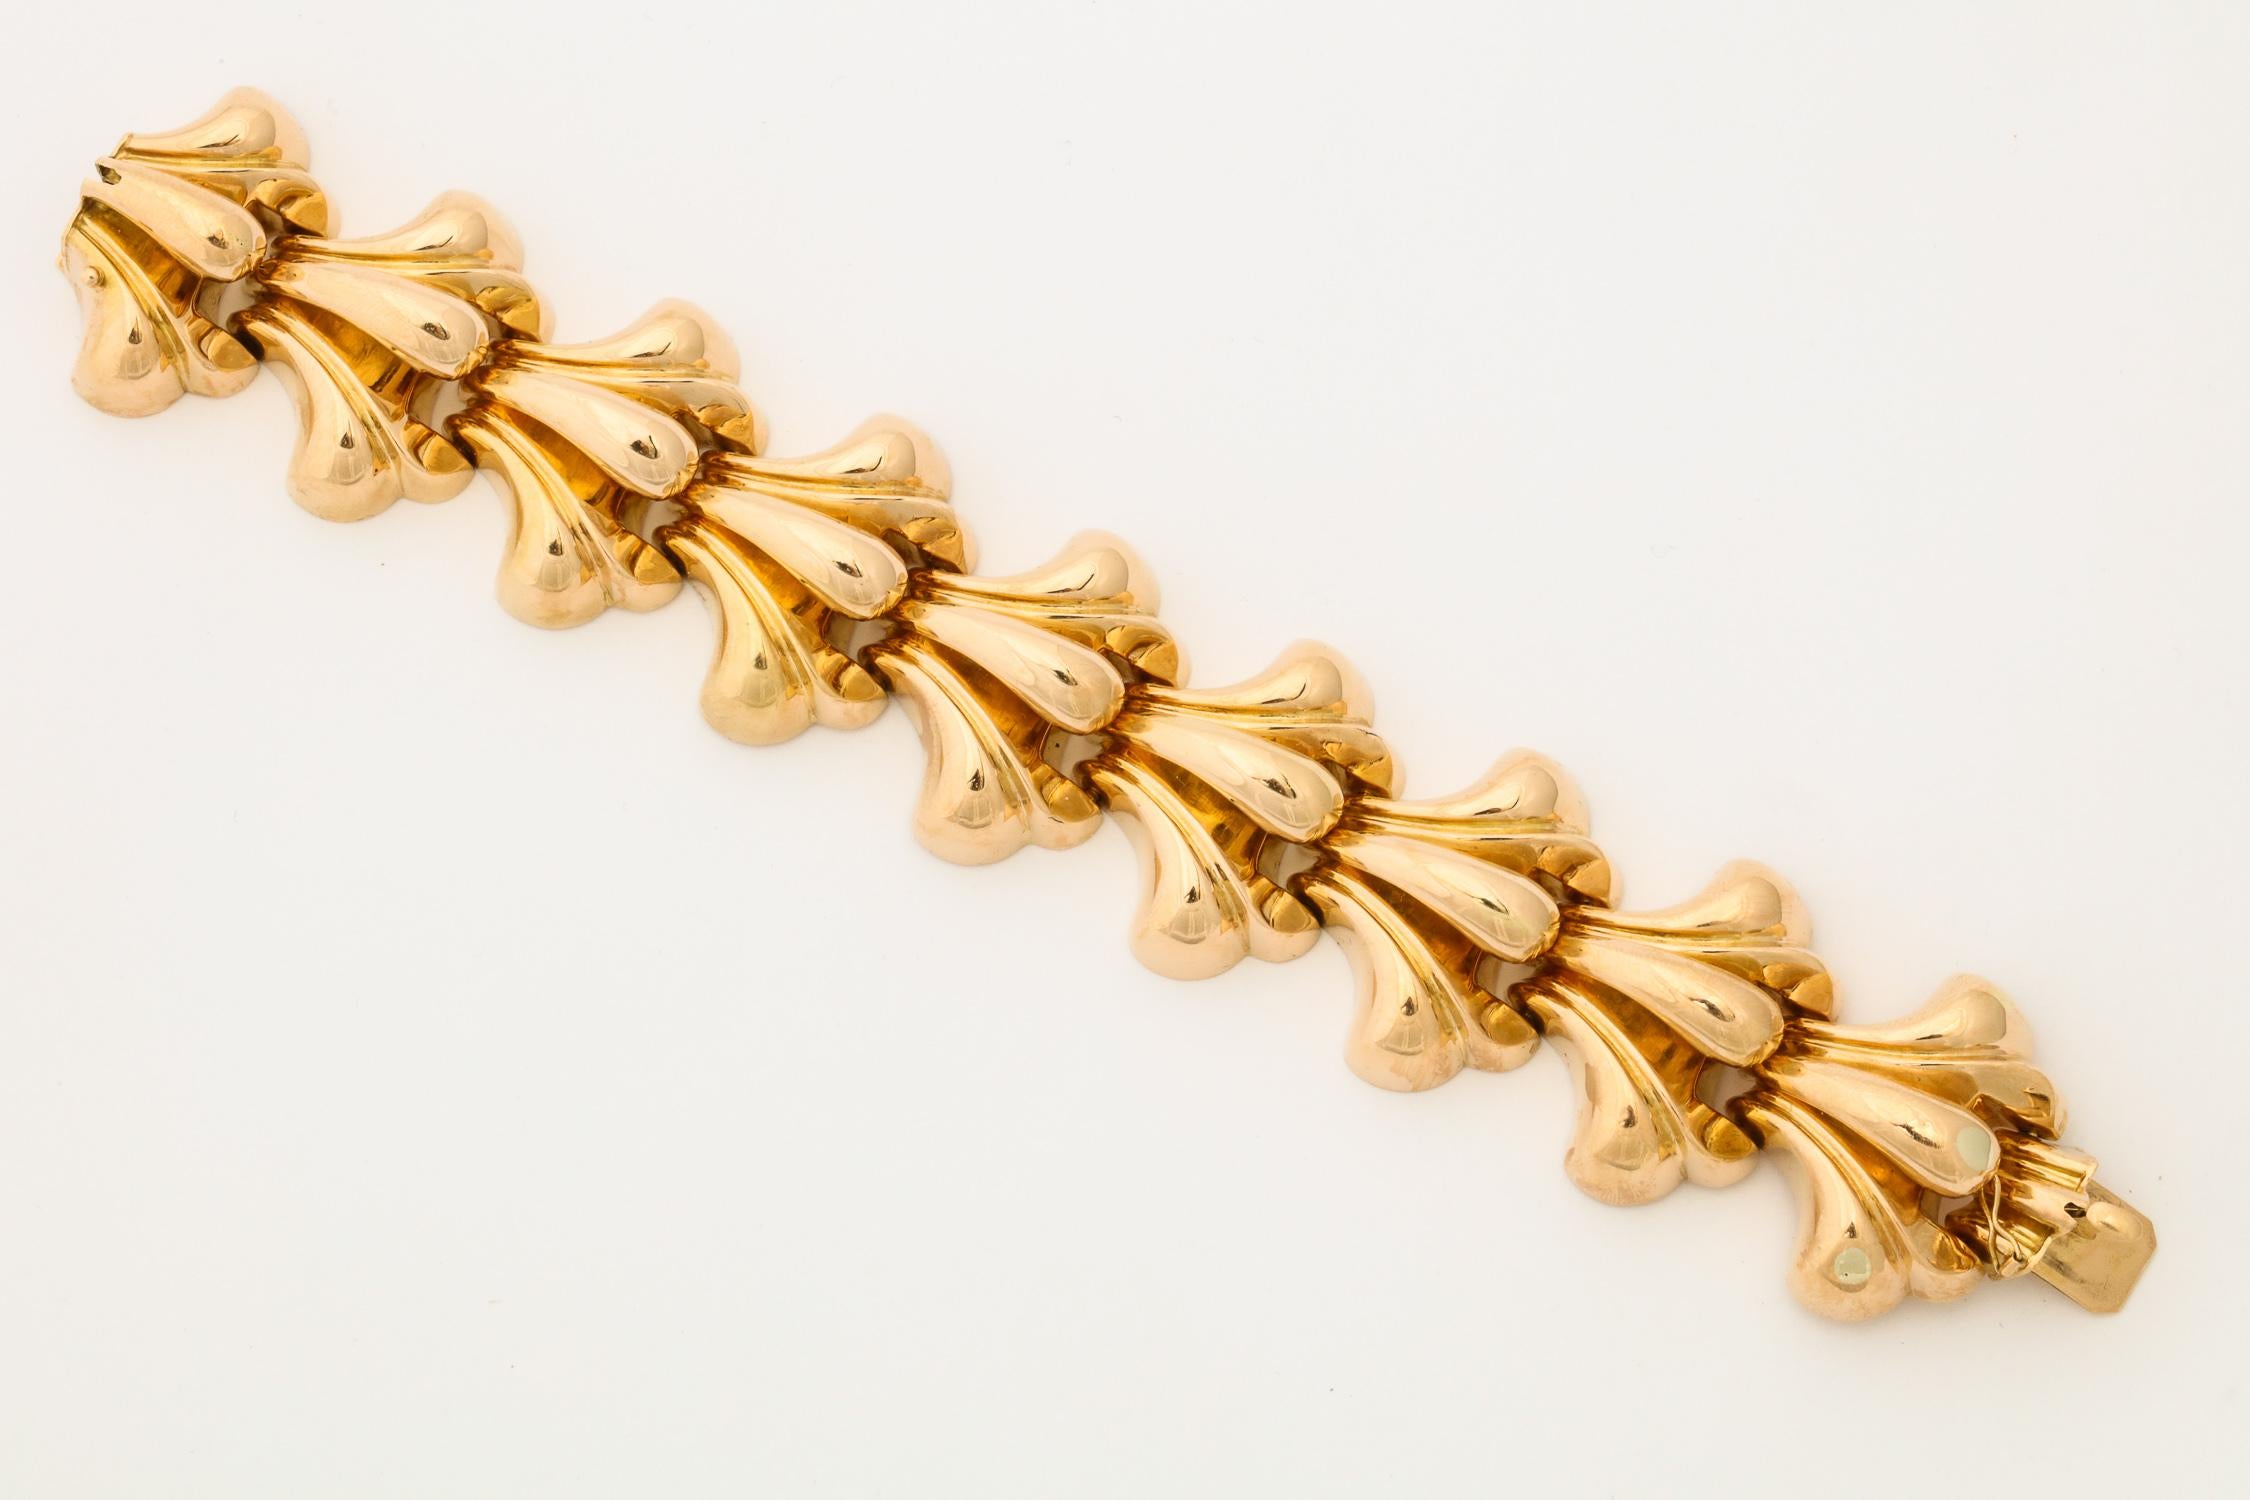 One Ladies 18kt High Polish Gold Three Dimensional Link Bracelet Designed With Eight Spray Motif Panels In All. Beautifully Flexibly Made With Eight Swivel Hinges For Maximum Comfort. Designed In Italy In The 1960's.